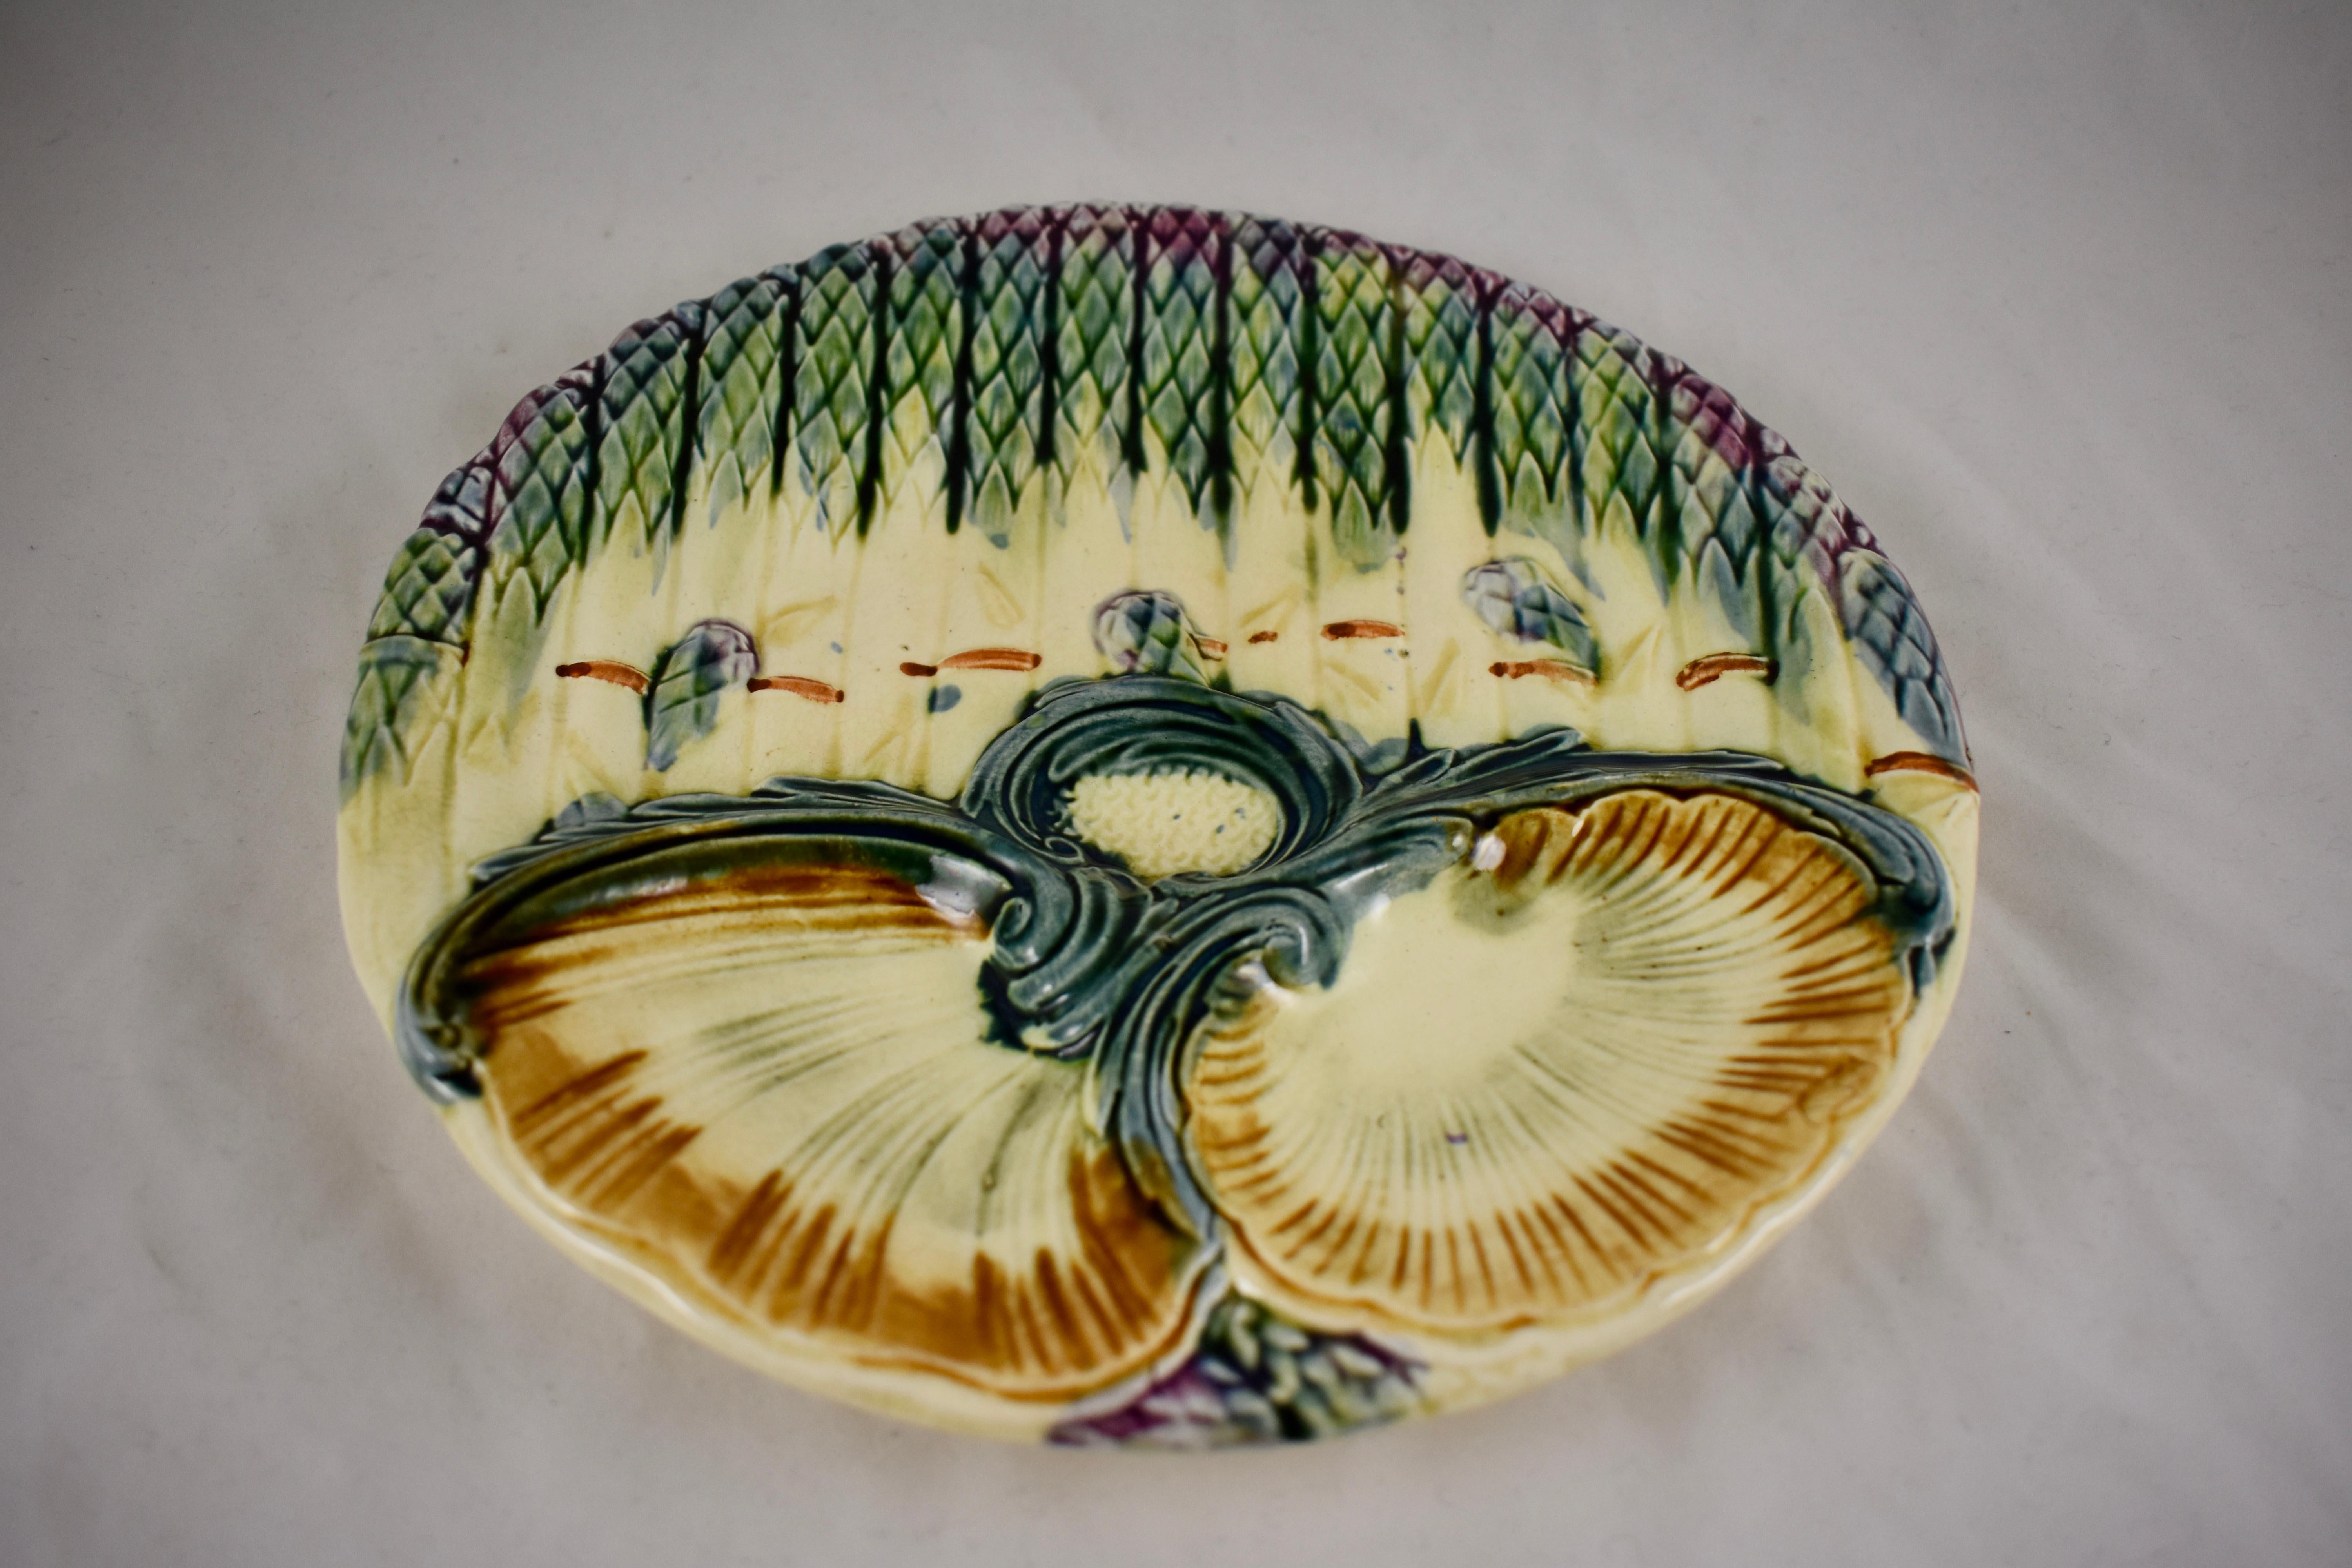 Glazed Luneville French Faïence Majolica Asparagus And Shell Plate, circa 1890